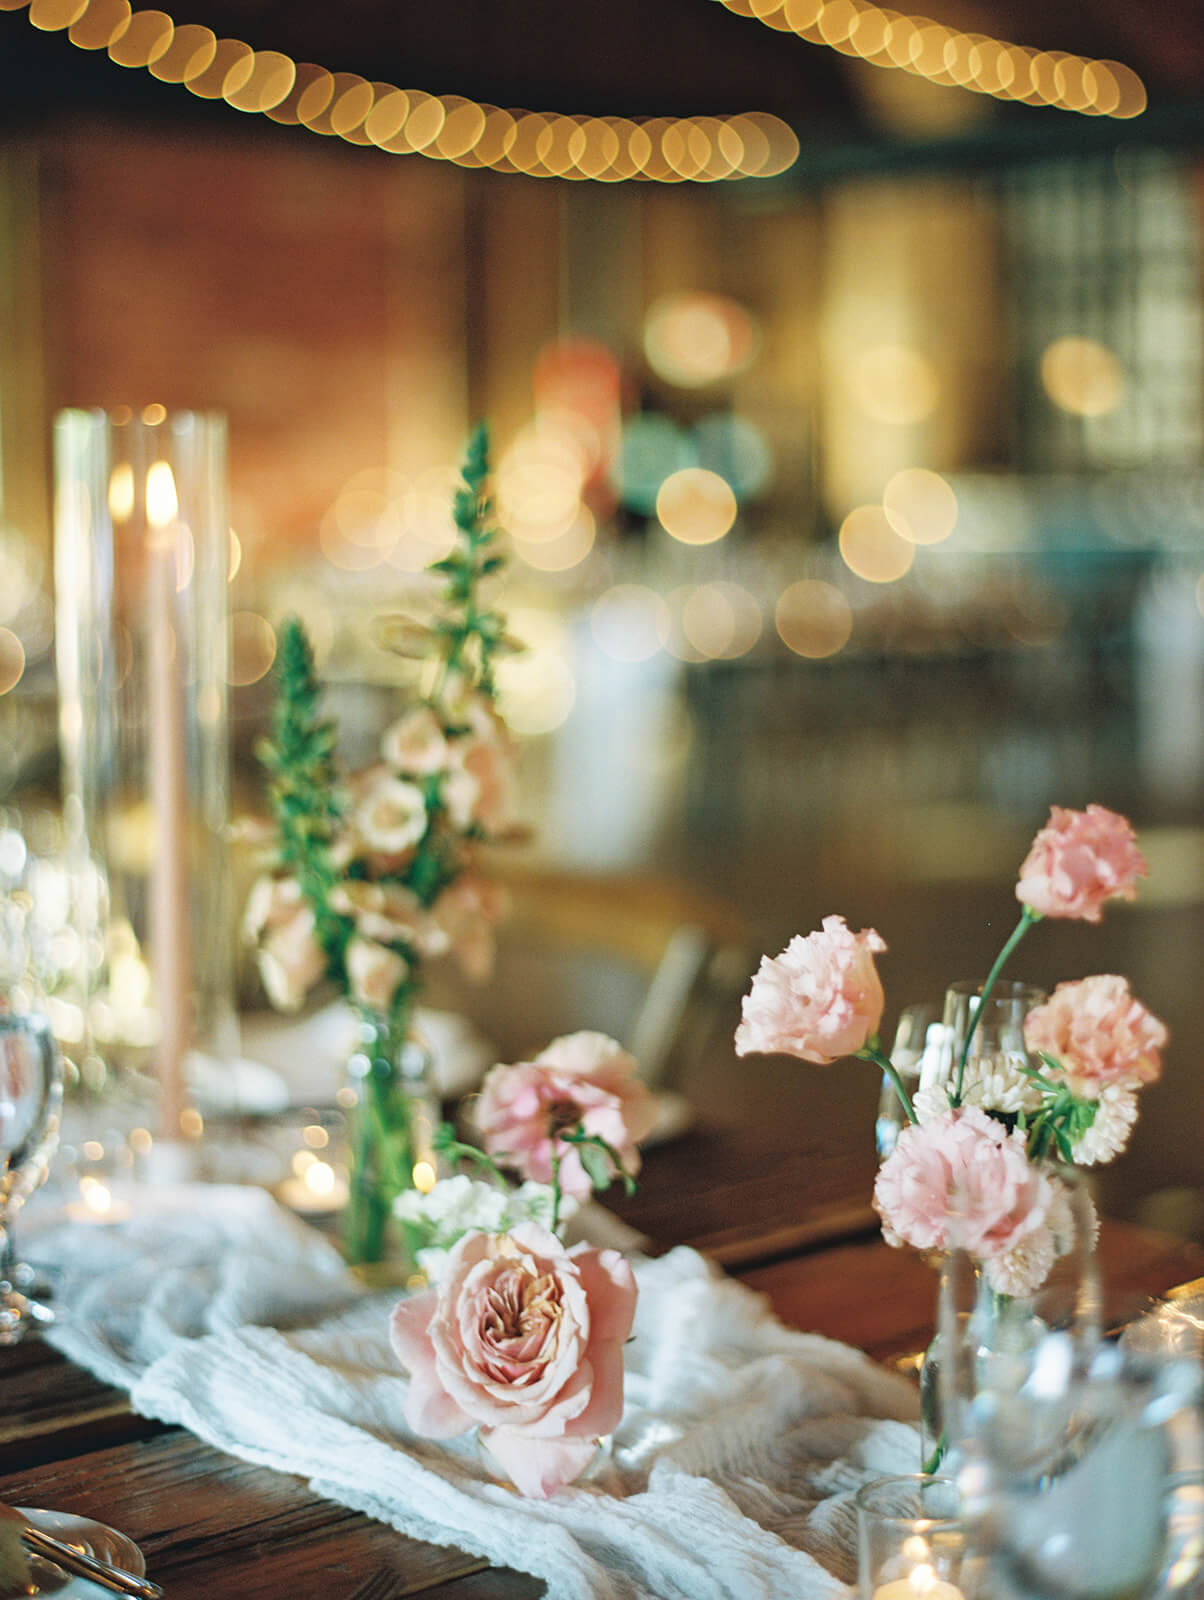 A close up of a table setup with flowers, linens, and candles